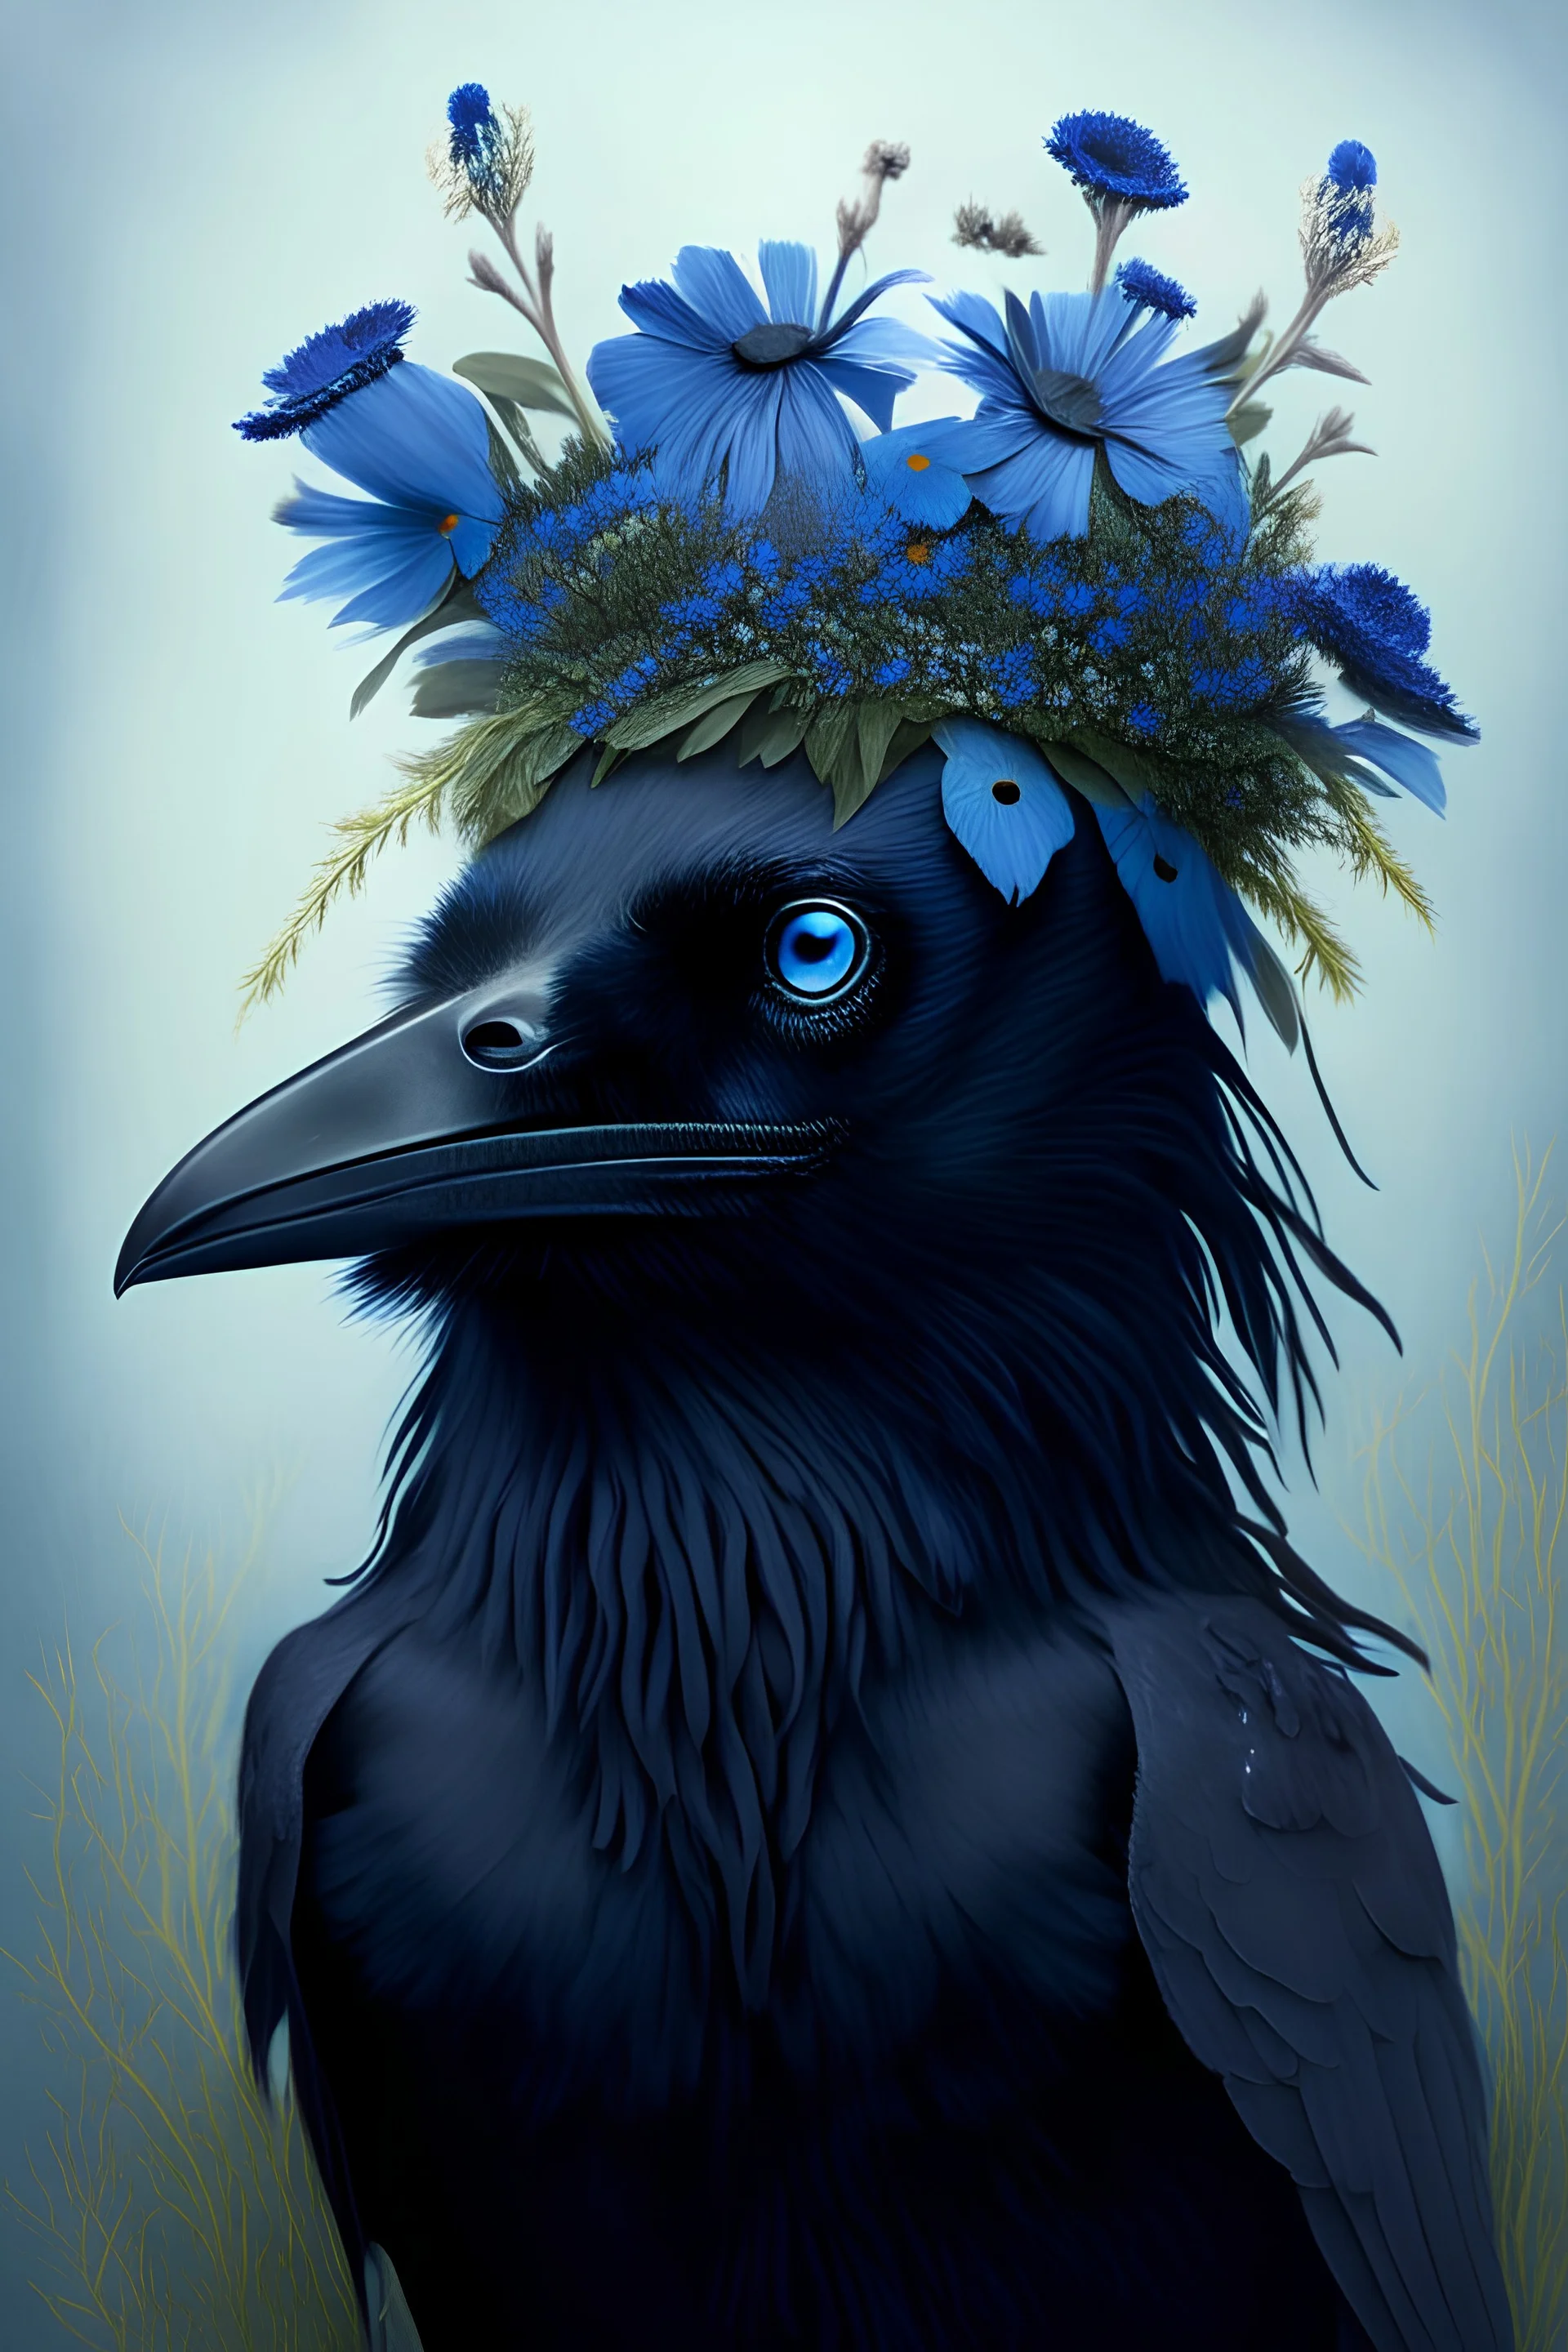 spookie Raven with wild blue flowers on the head